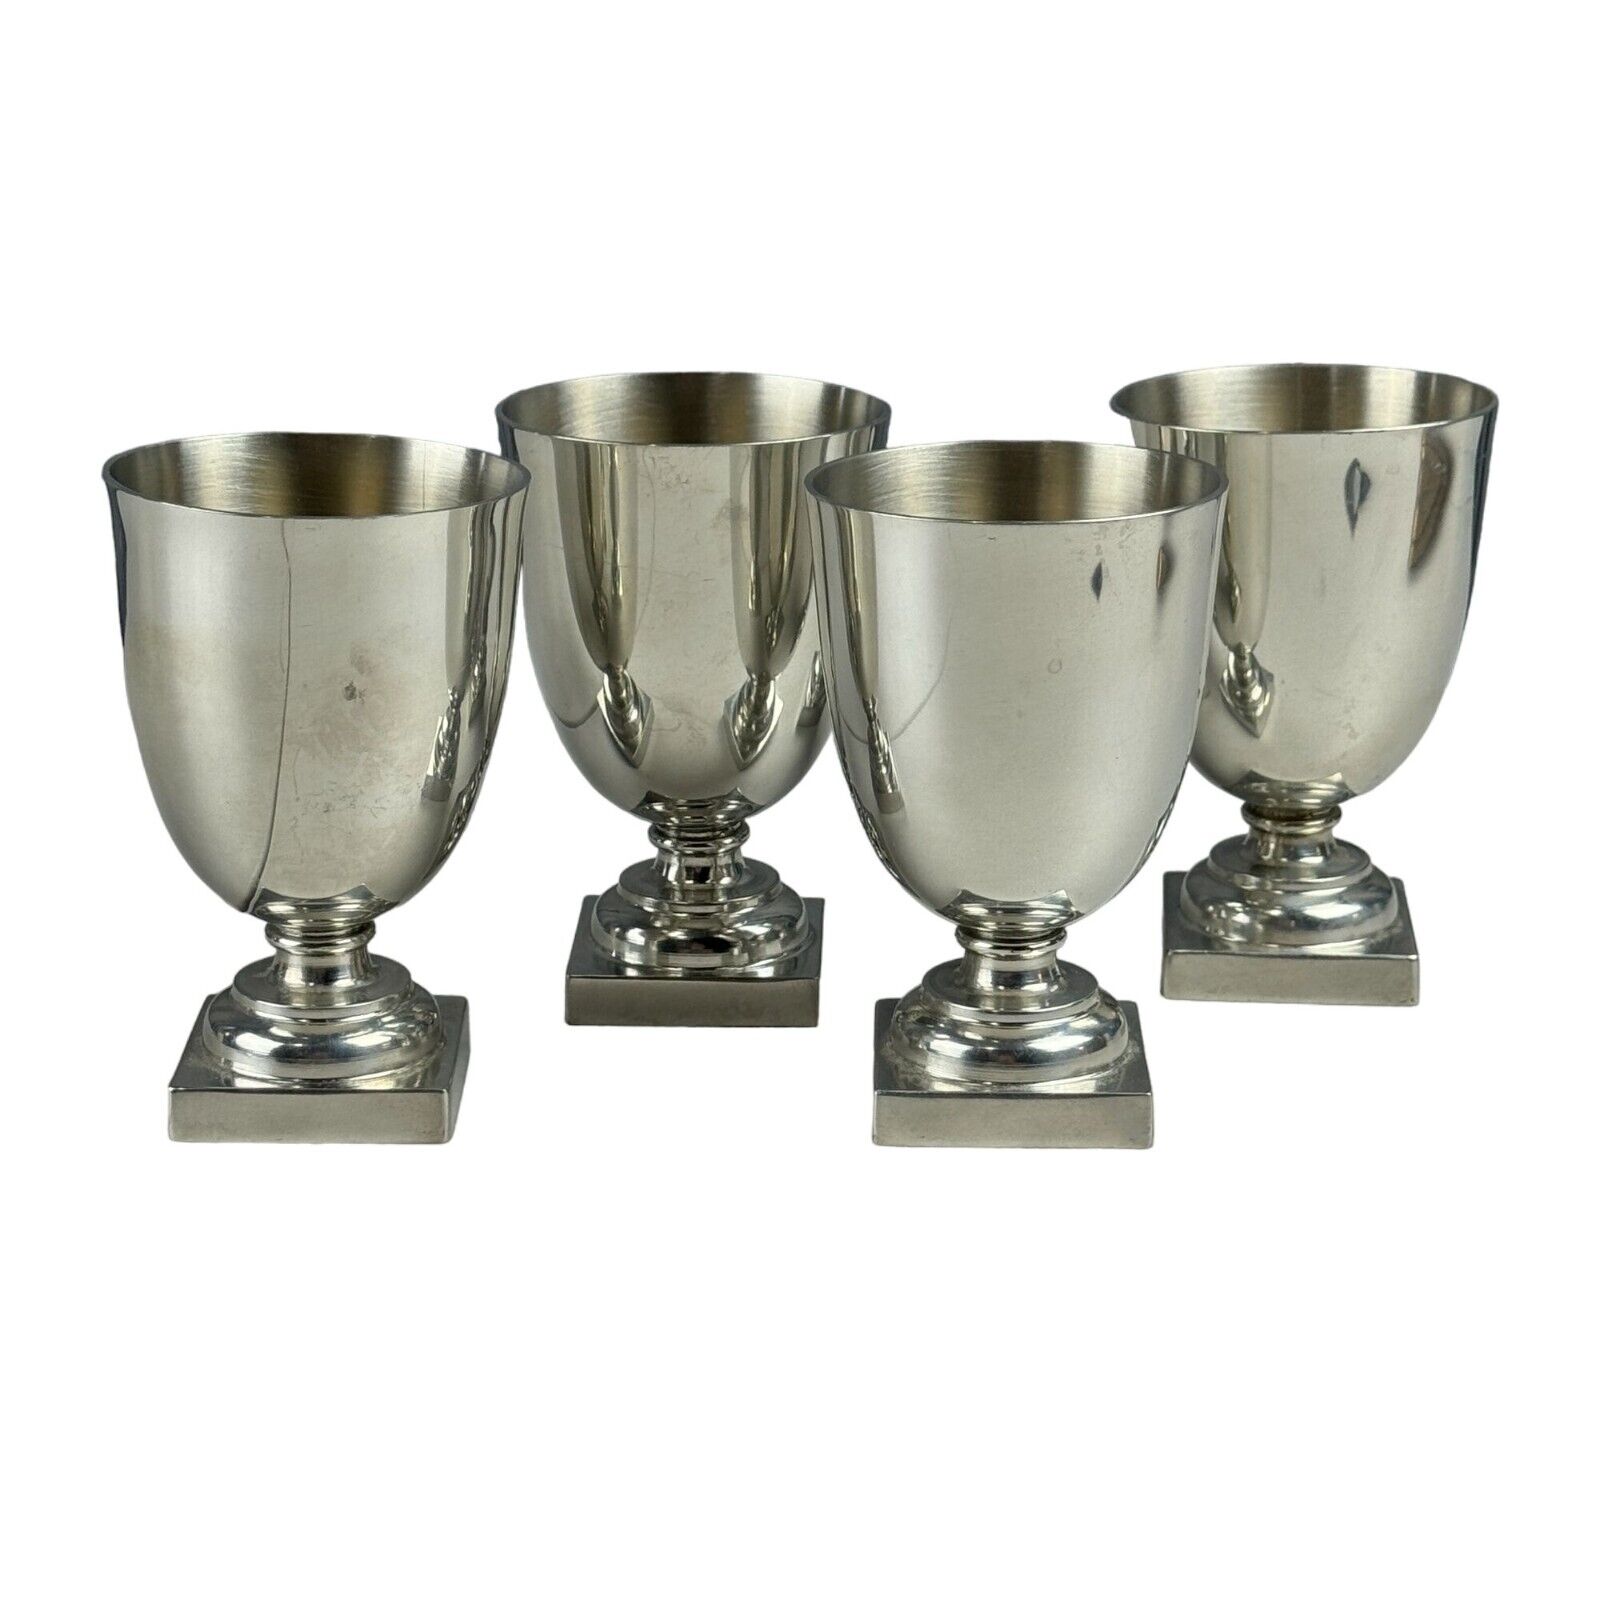 Stieff Pewter P65 Jefferson Cup Goblets Set Of 4 Monticello